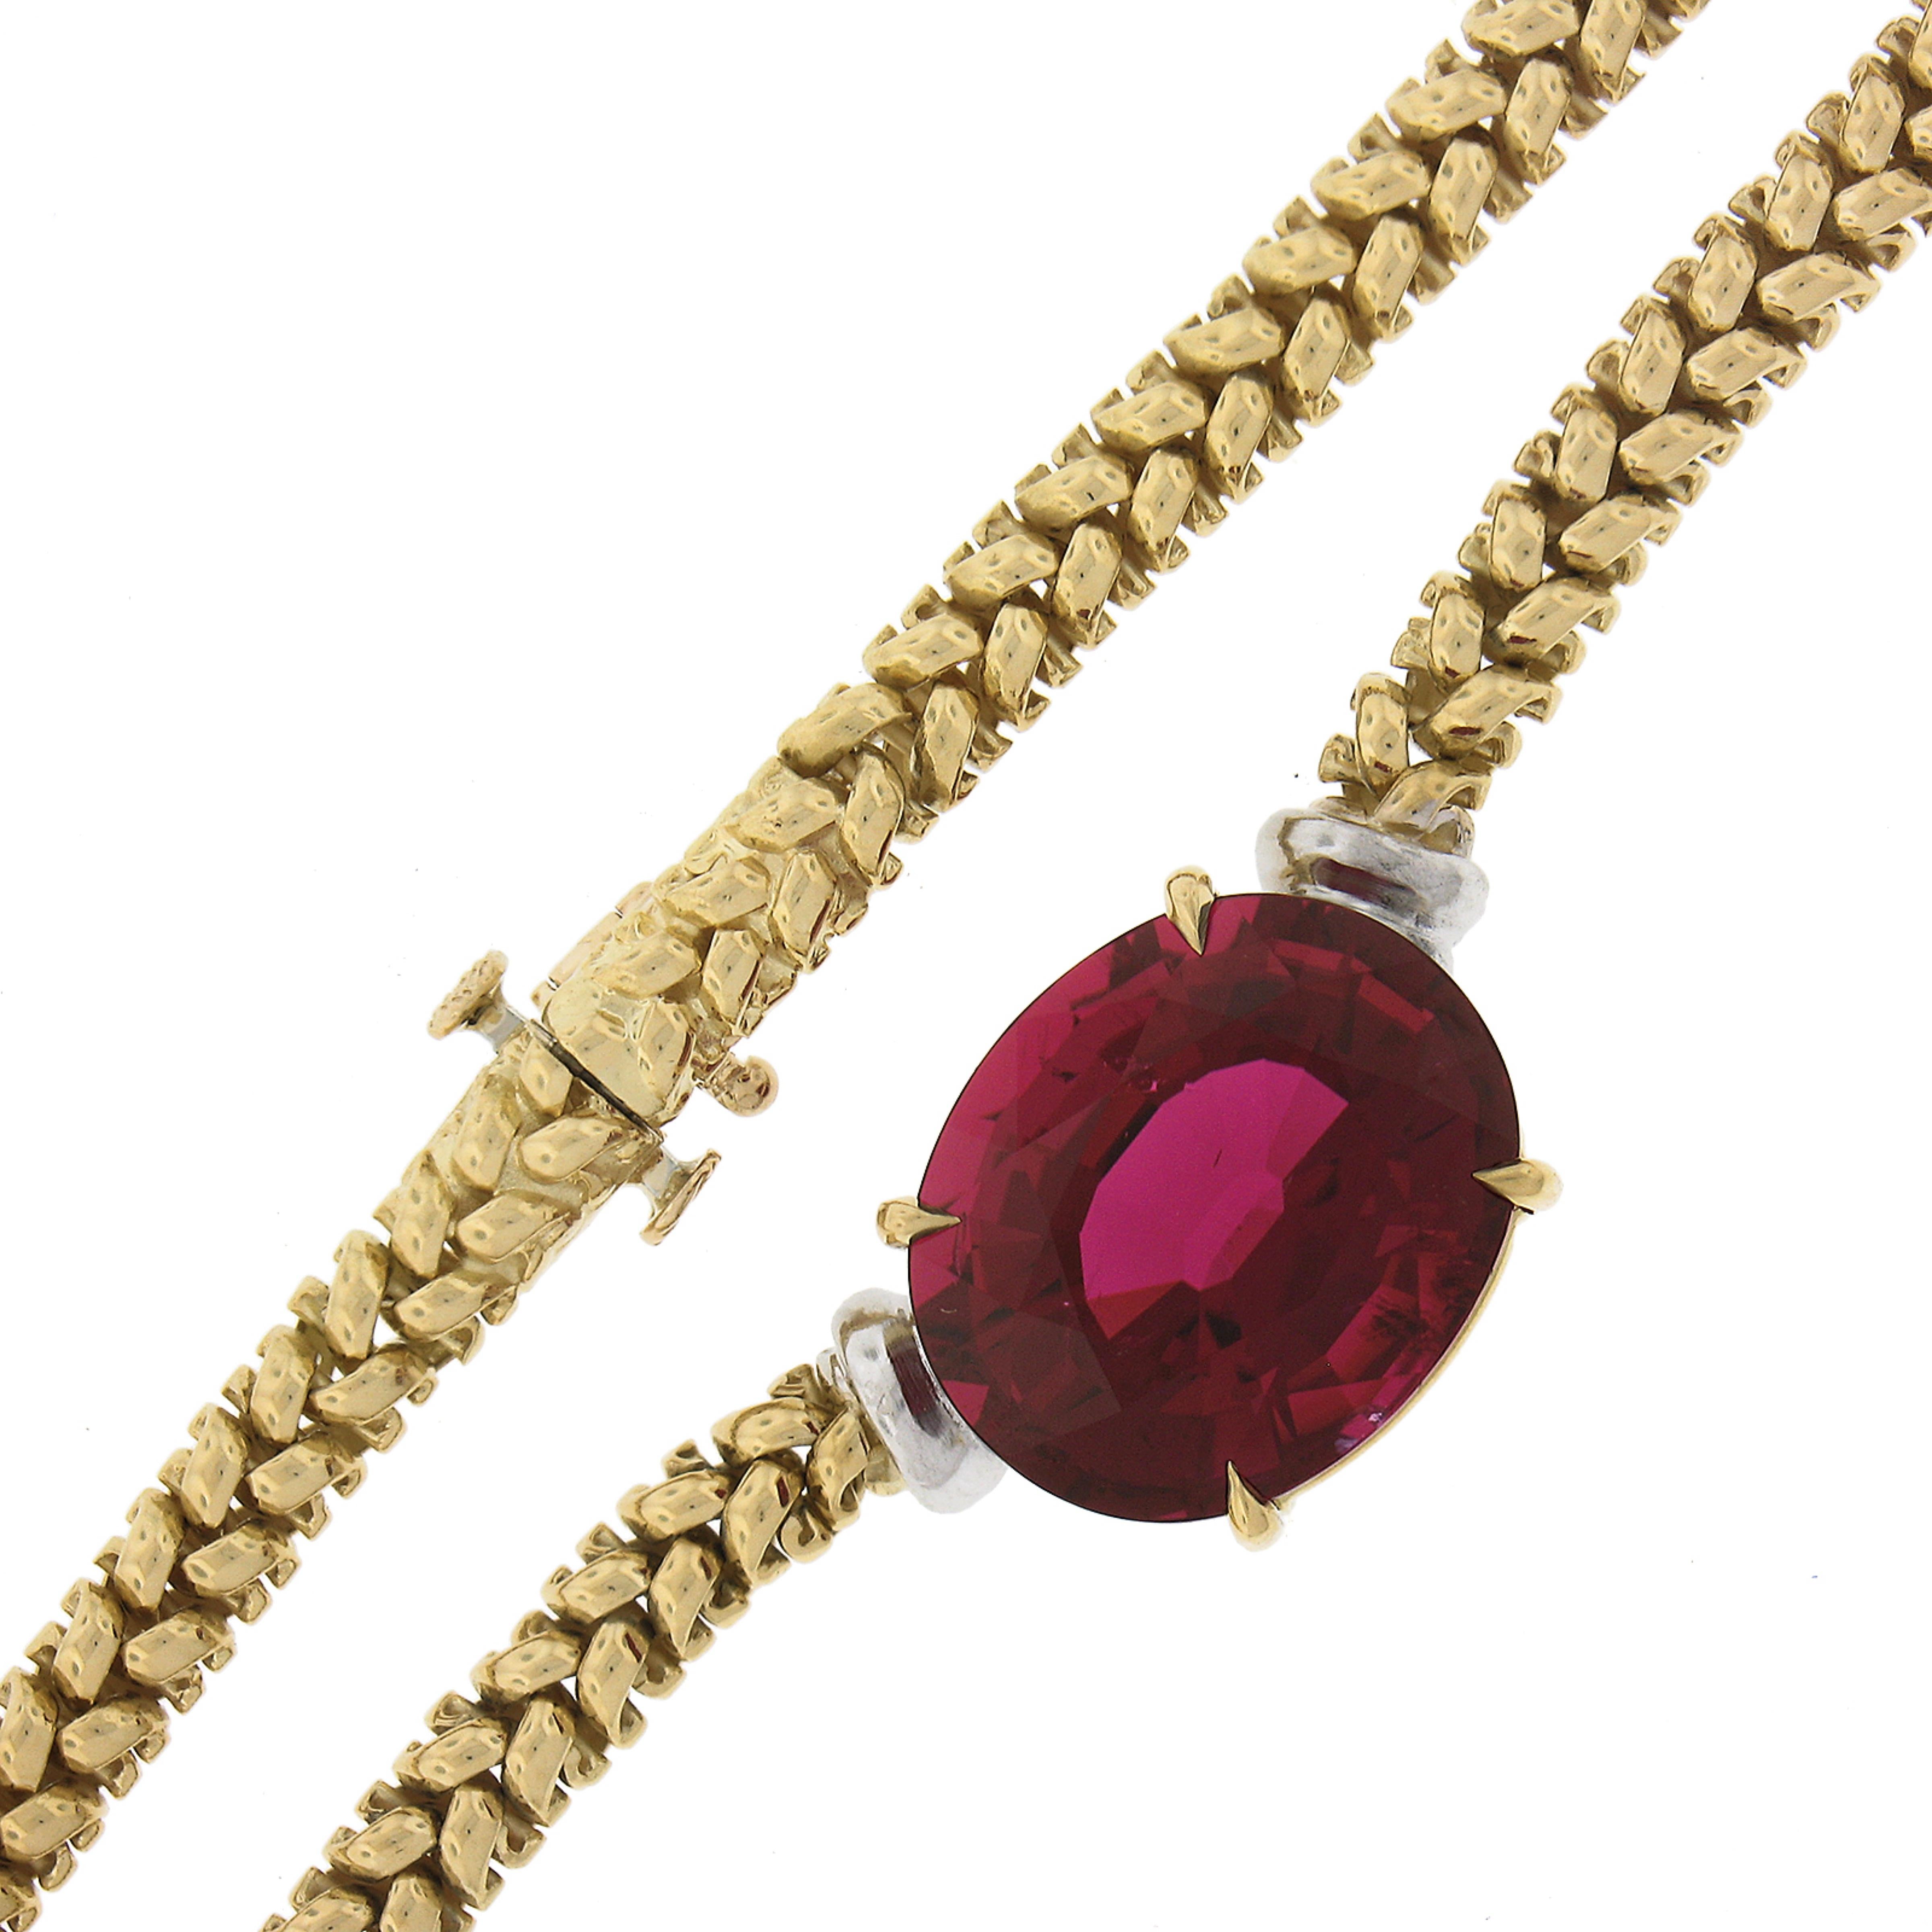 18k Two Tone Gold 12.82 Carat GIA Large Oval Red Rubellite Tourmaline Necklace For Sale 2